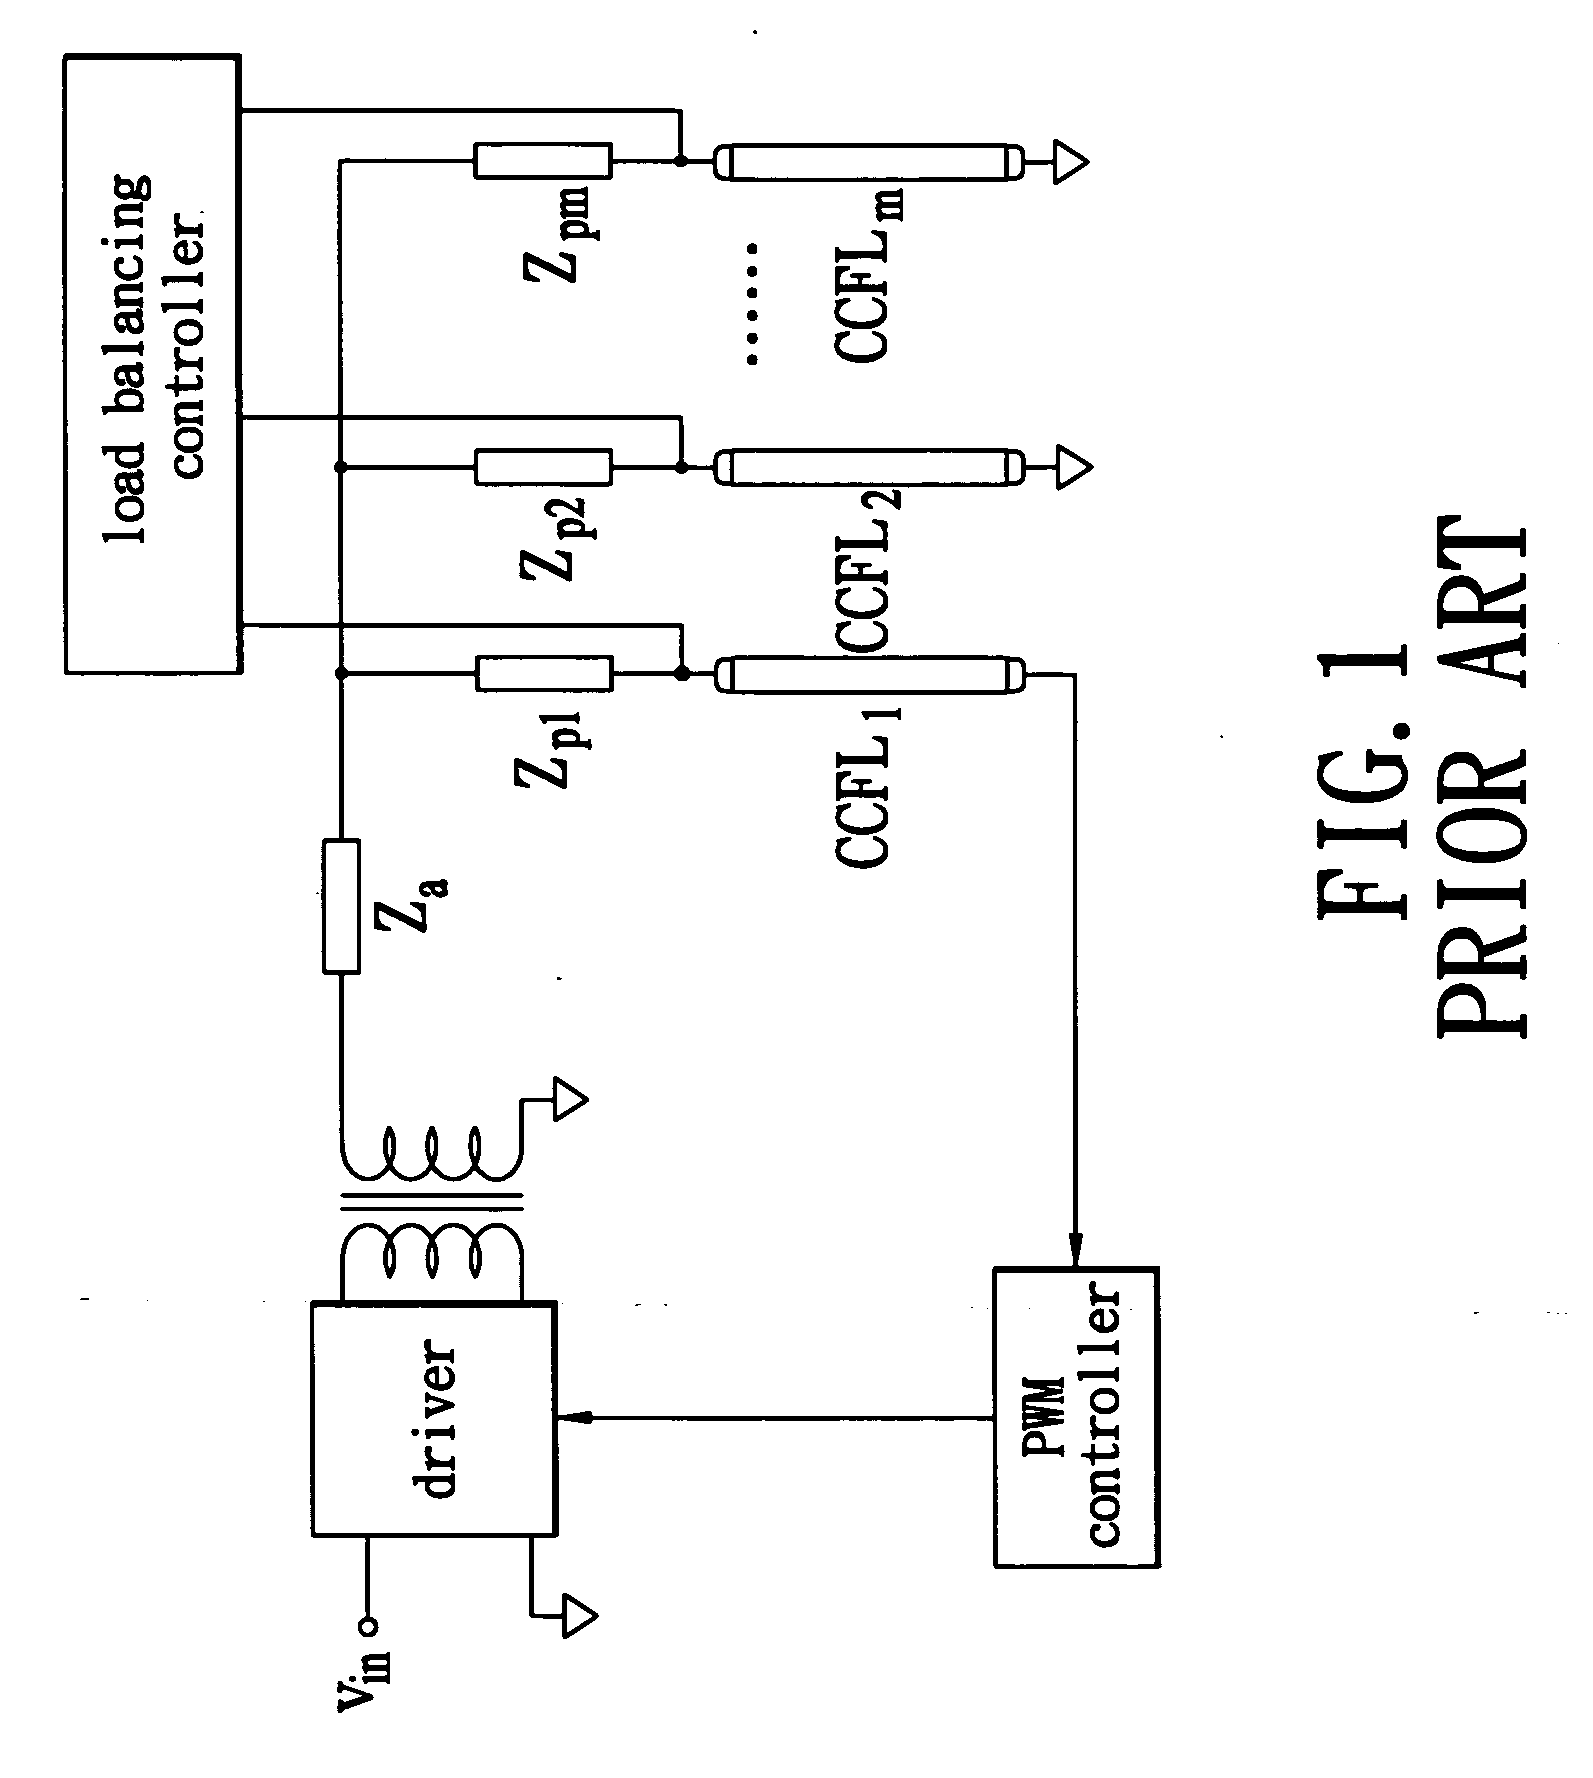 Multiple-ccfl parallel driving circuit and the associated current balancing control method for liquid crystal display